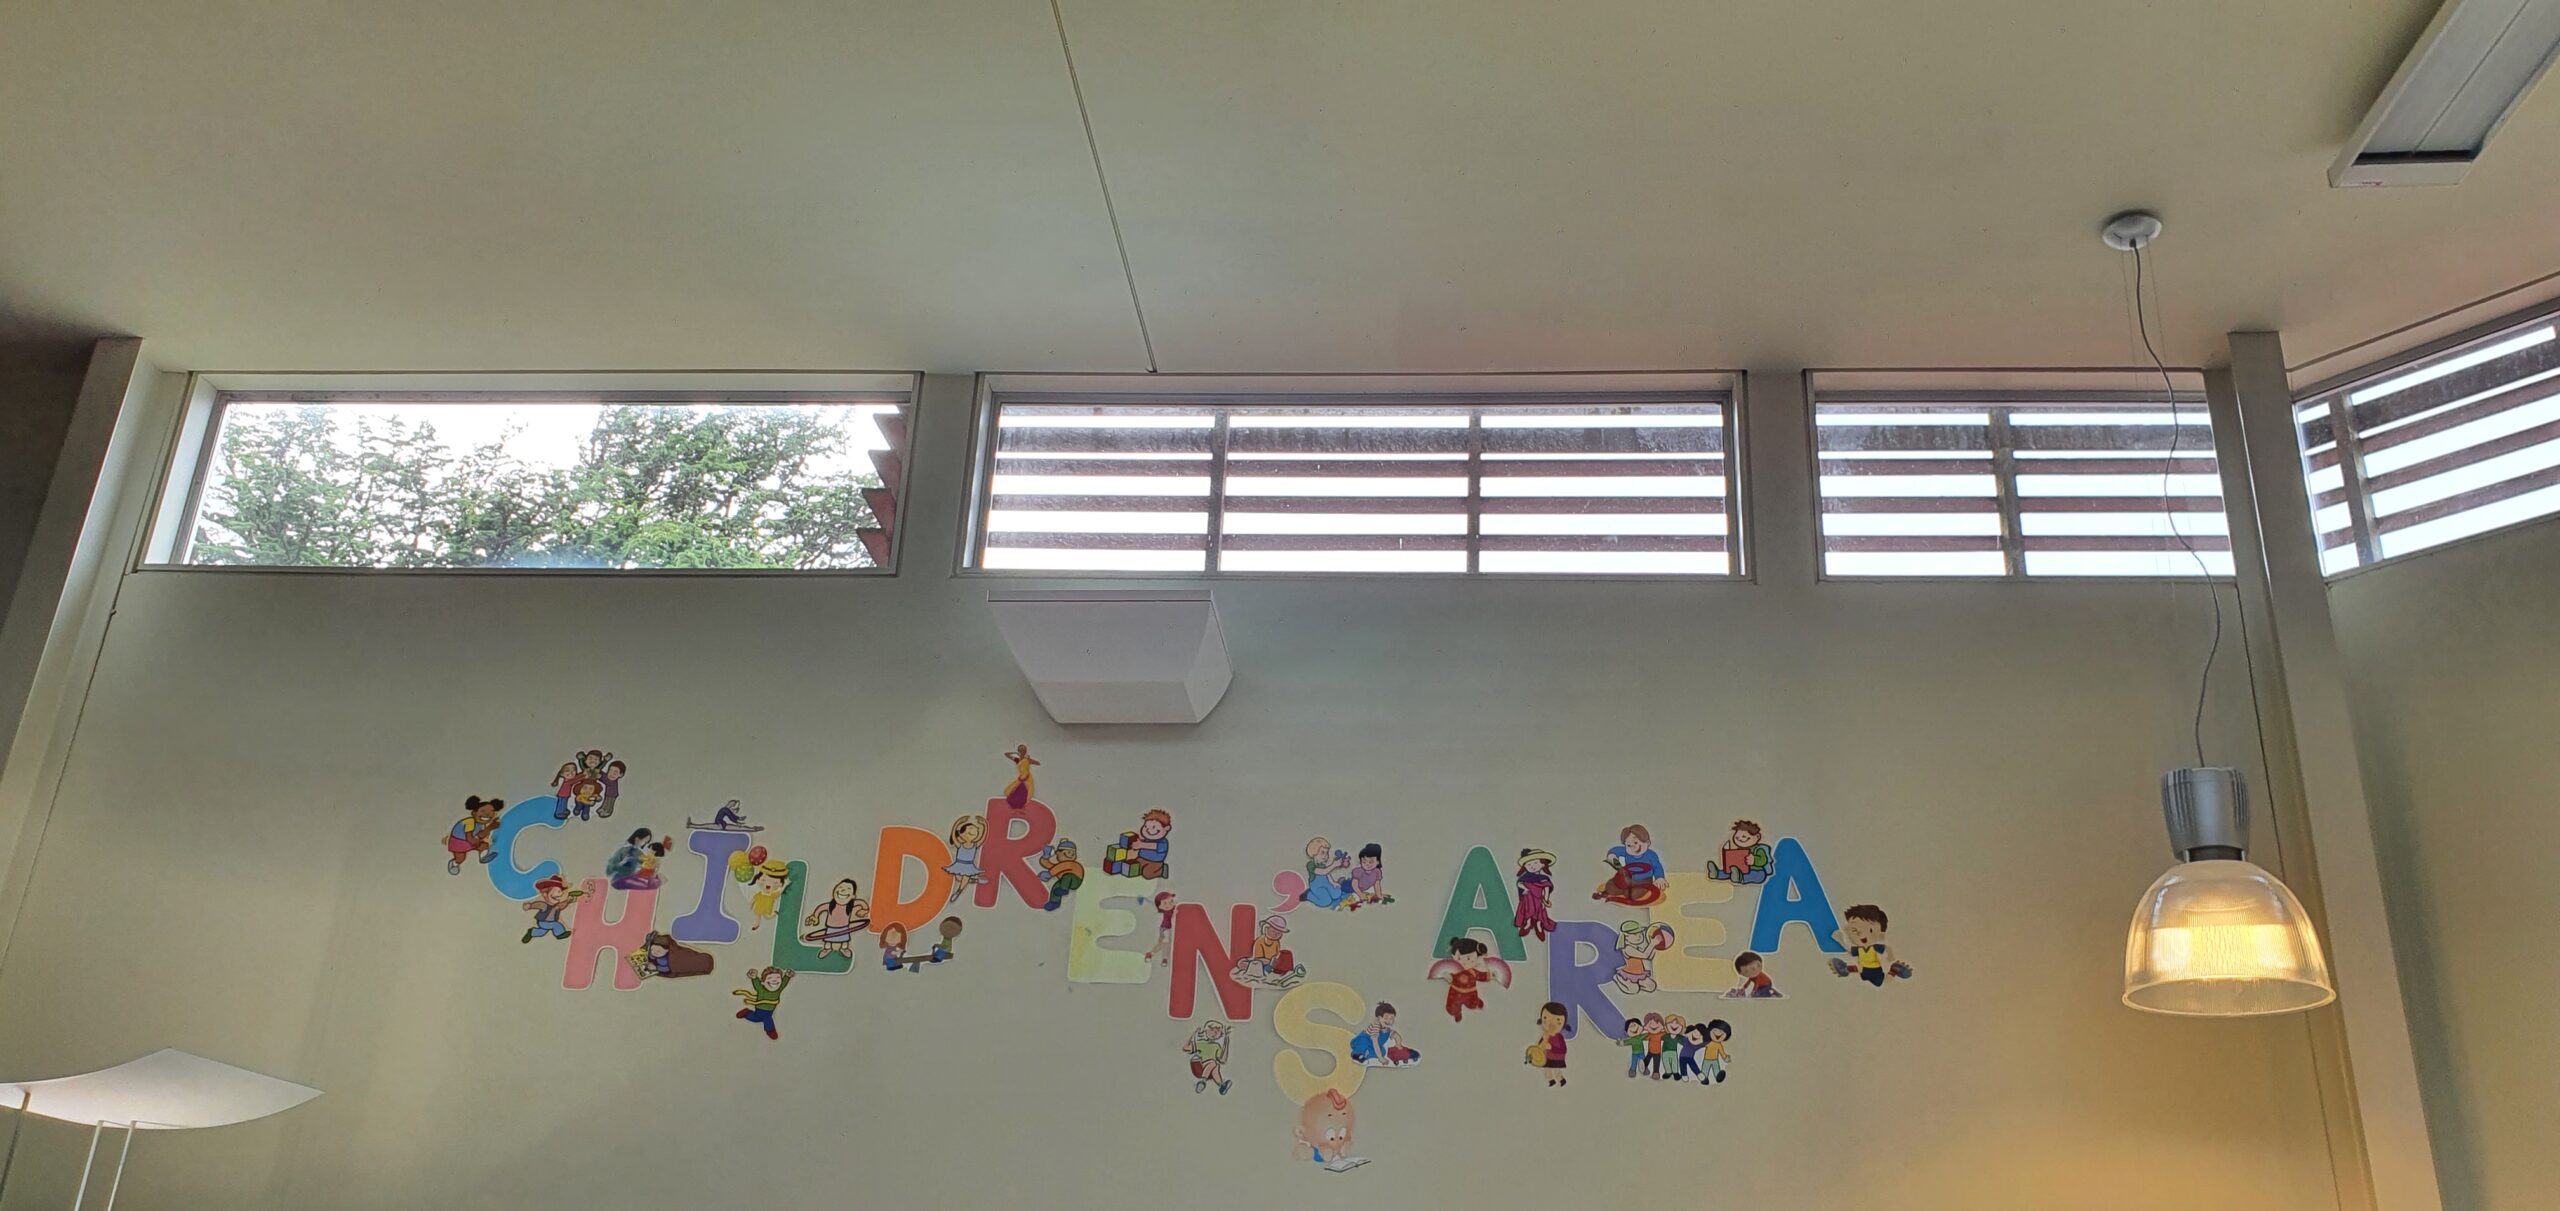 Coloured paper letters spelling 'Children's Area' on the wall below small high windows with wooden blinds.